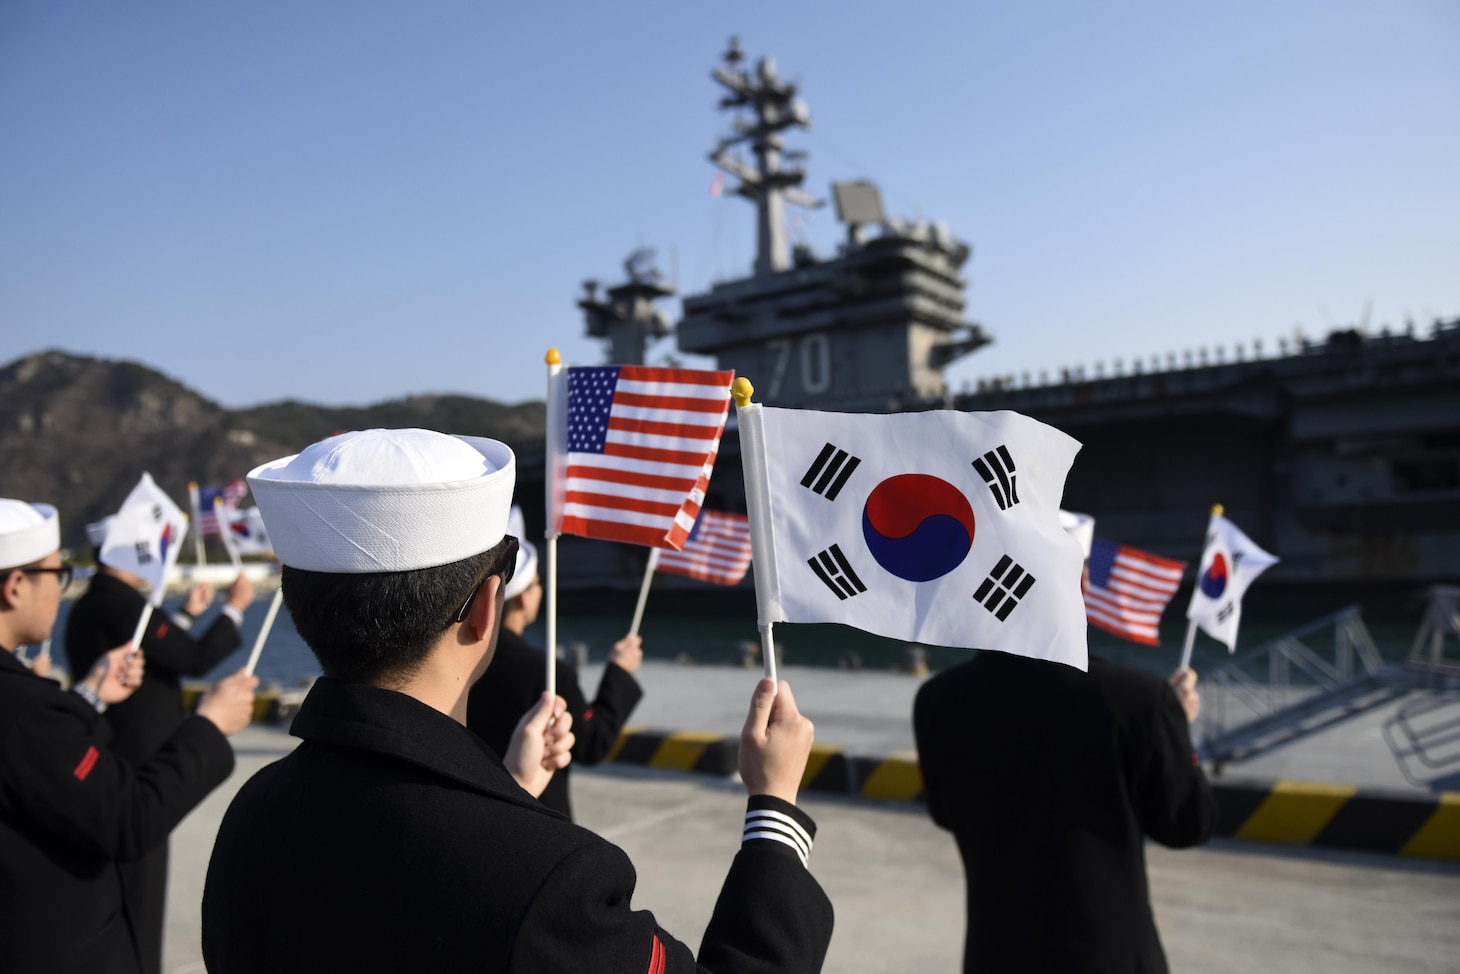 (March 15, 2017) A Republic of Korea (ROK) sailor waves flags as Nimitz-class aircraft carrier USS Carl Vinson (CVN-70) pulls into ROK Fleet headquarters. The Carl Vinson Carrier Strike Group is on a regularly scheduled Western Pacific deployment as part of the U.S. Pacific Fleet-led initiative to extend the command and control functions of U.S. 3rd Fleet. (U.S. Navy photo by Mass Communication Specialist 2nd Class Jermaine M. Ralliford)